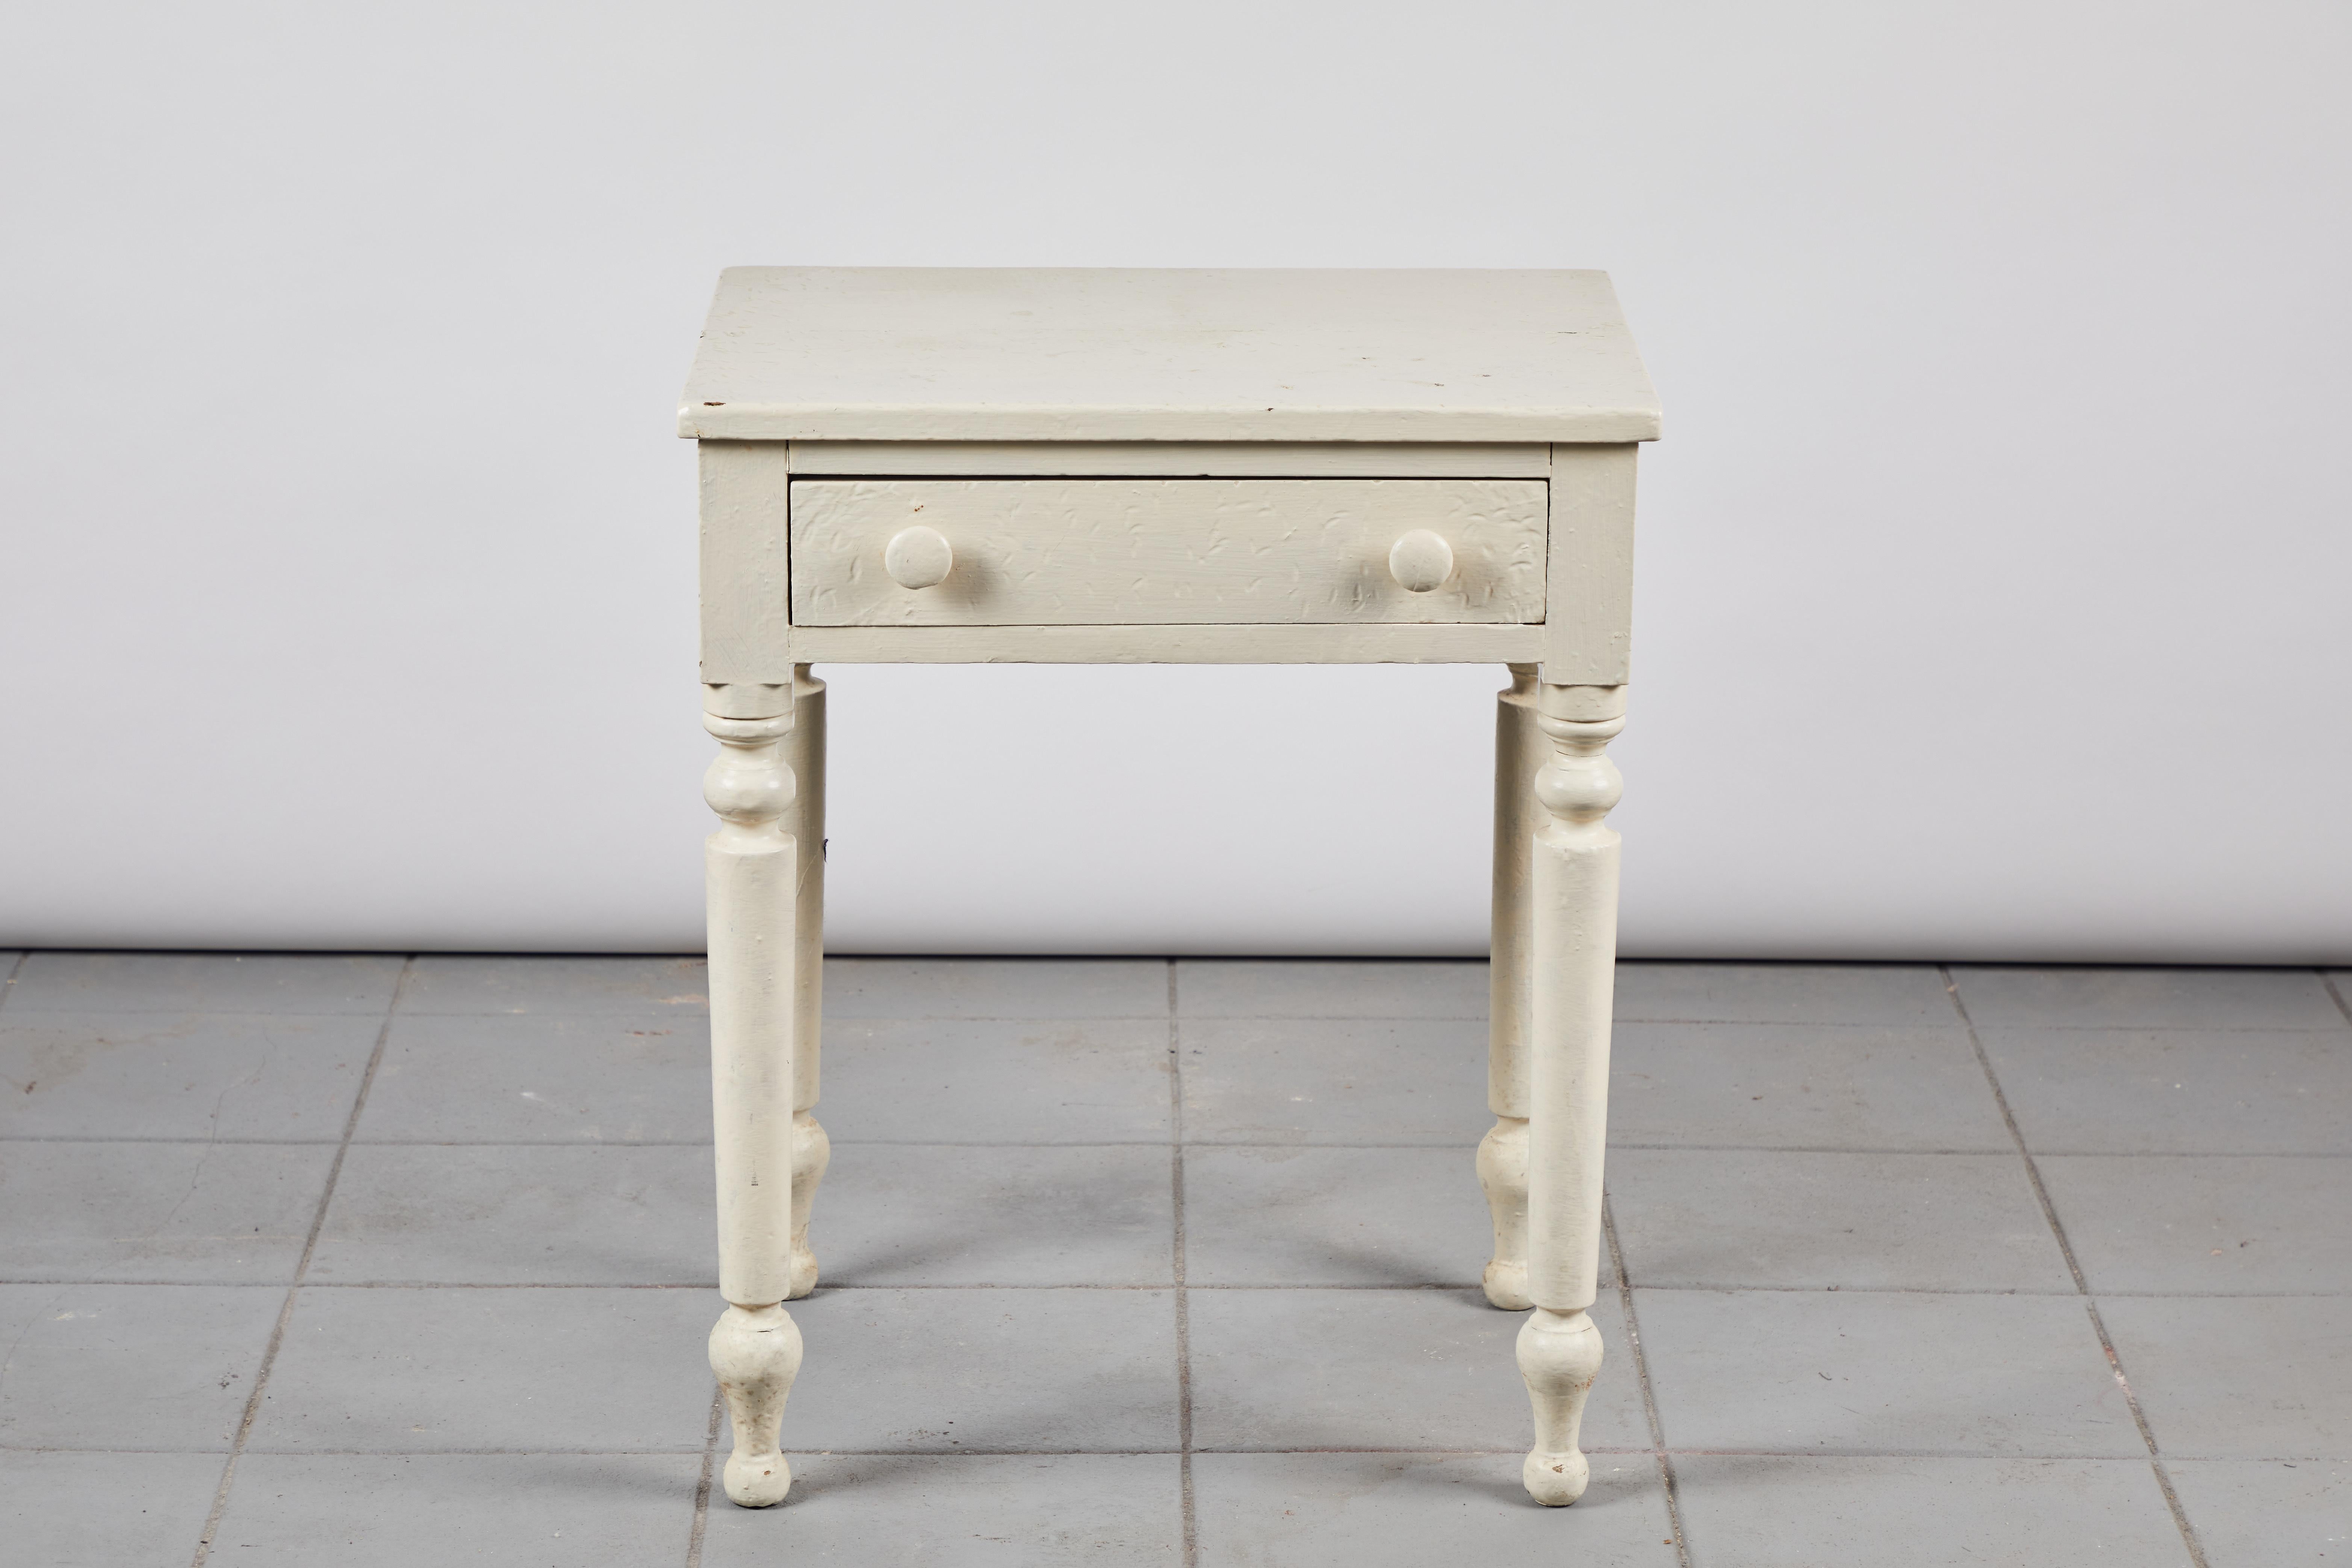 Wood Early American White Painted Side Table